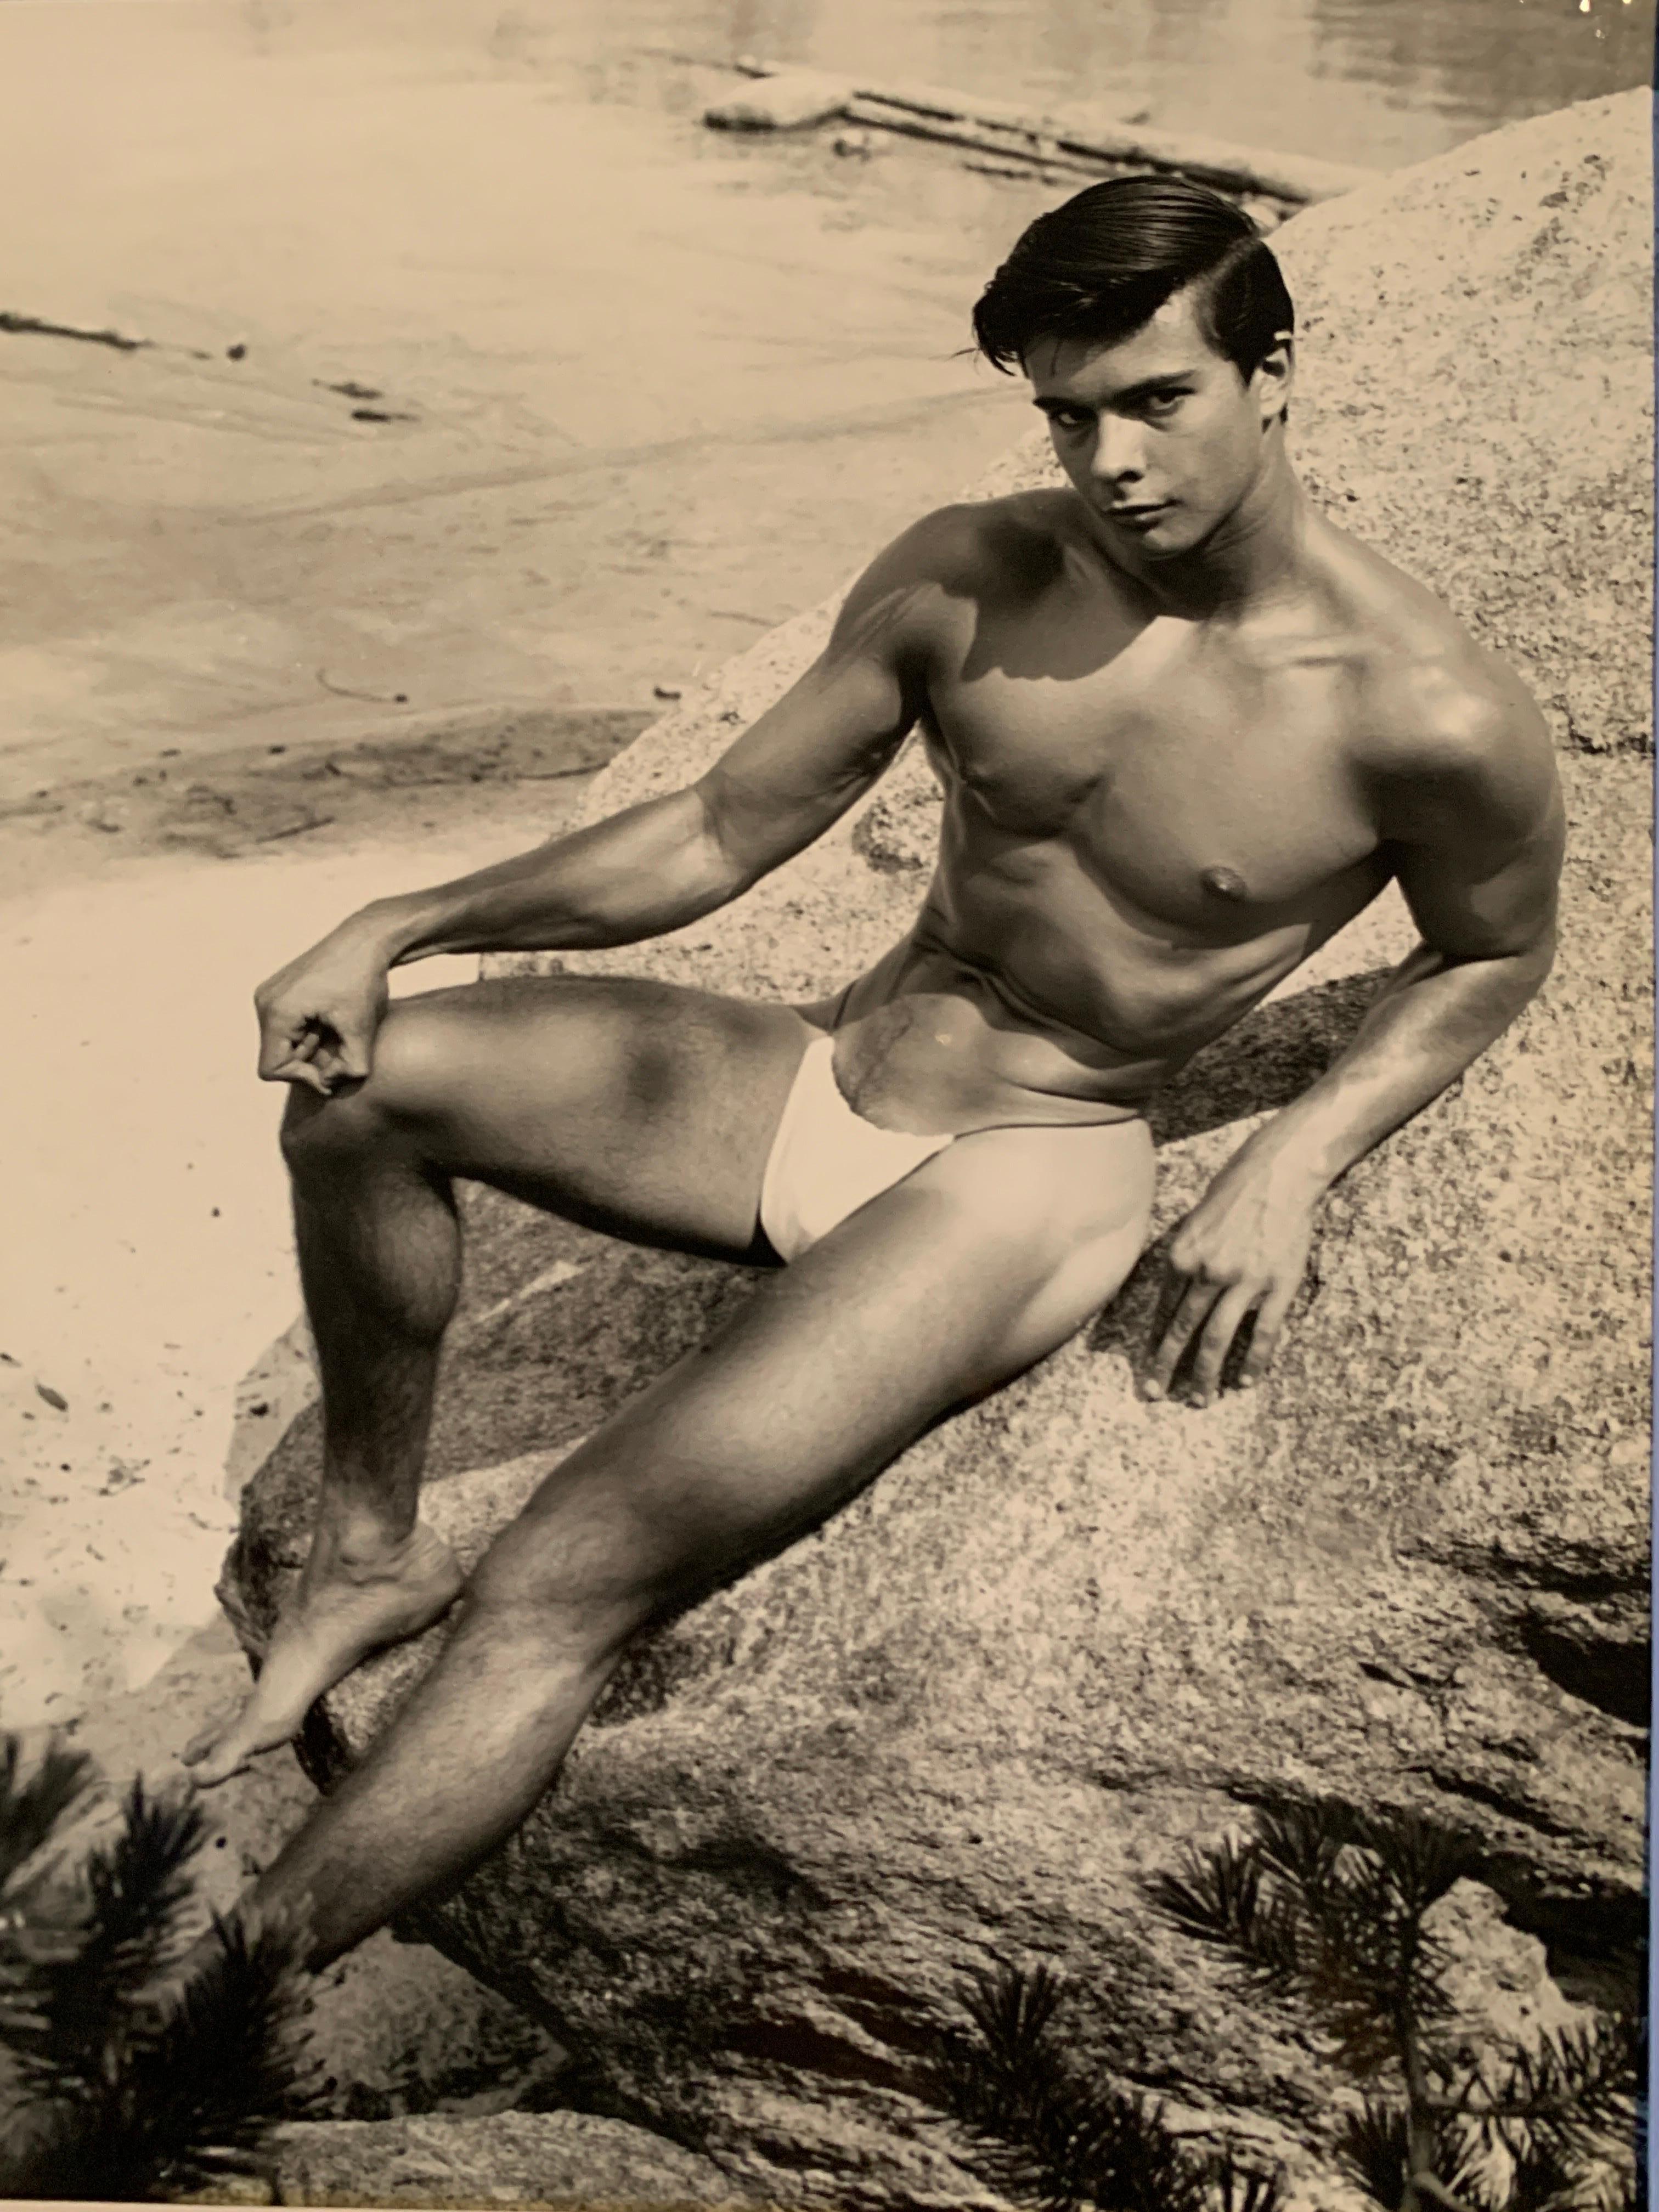 It is very rare to find a desirable iconic two piece set of original Bruce of Los Angeles vintage photographs. Especially with the iconic beach ball prop, and hands down, one of Bruce of LA ‘s favorite and best looking male models Edgar Hayes. This